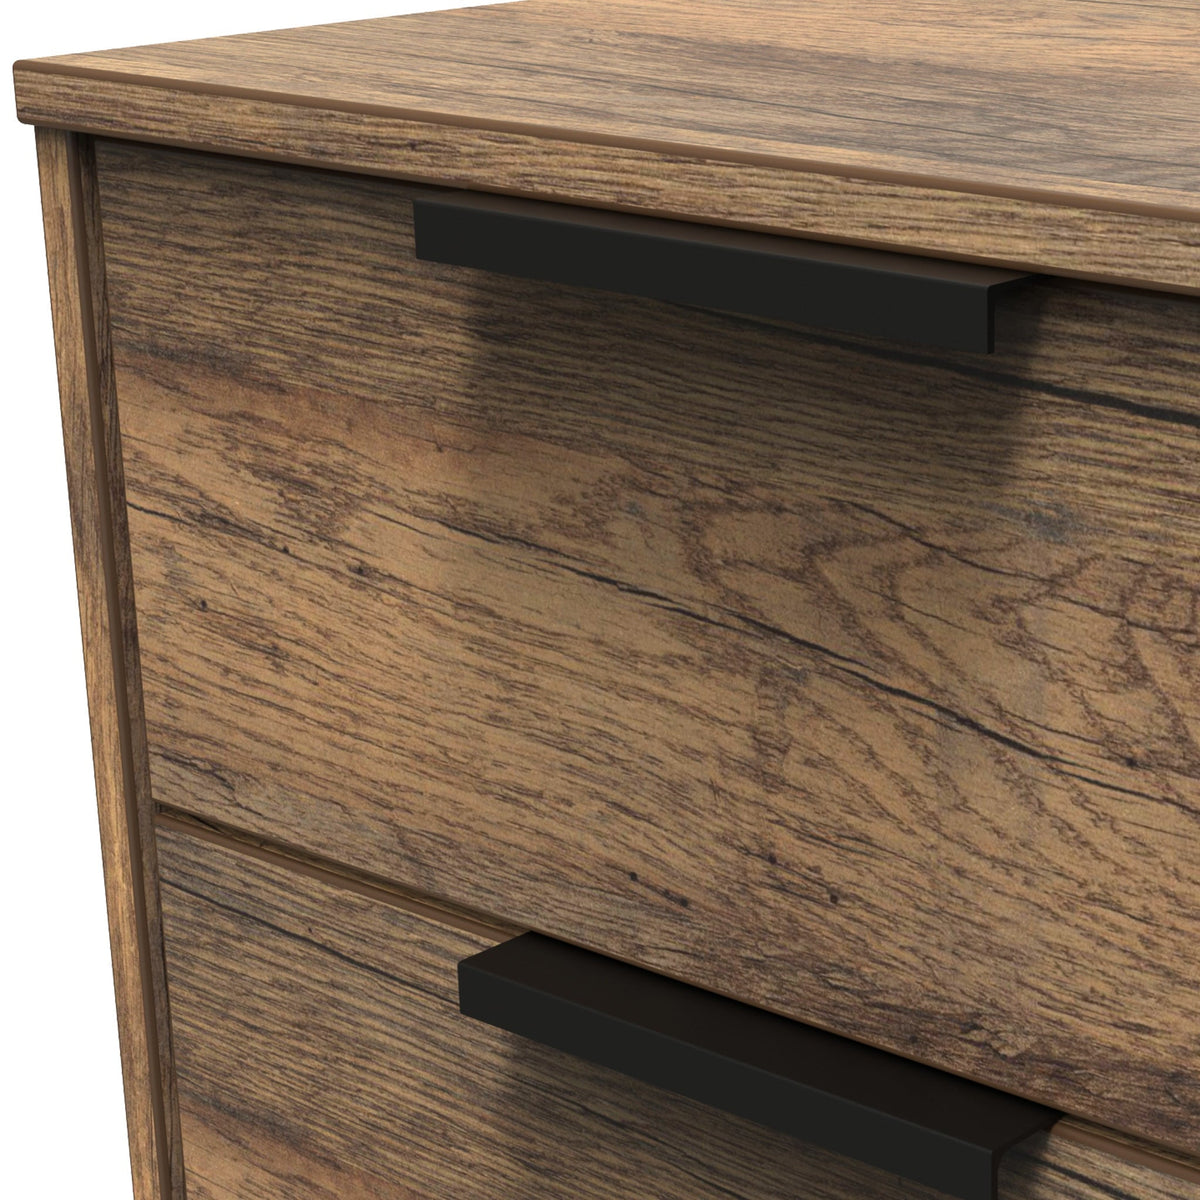 Morena Rustic Oak Effect Tiered Tallboy Chest of Drawers with Black Hairpin Legs